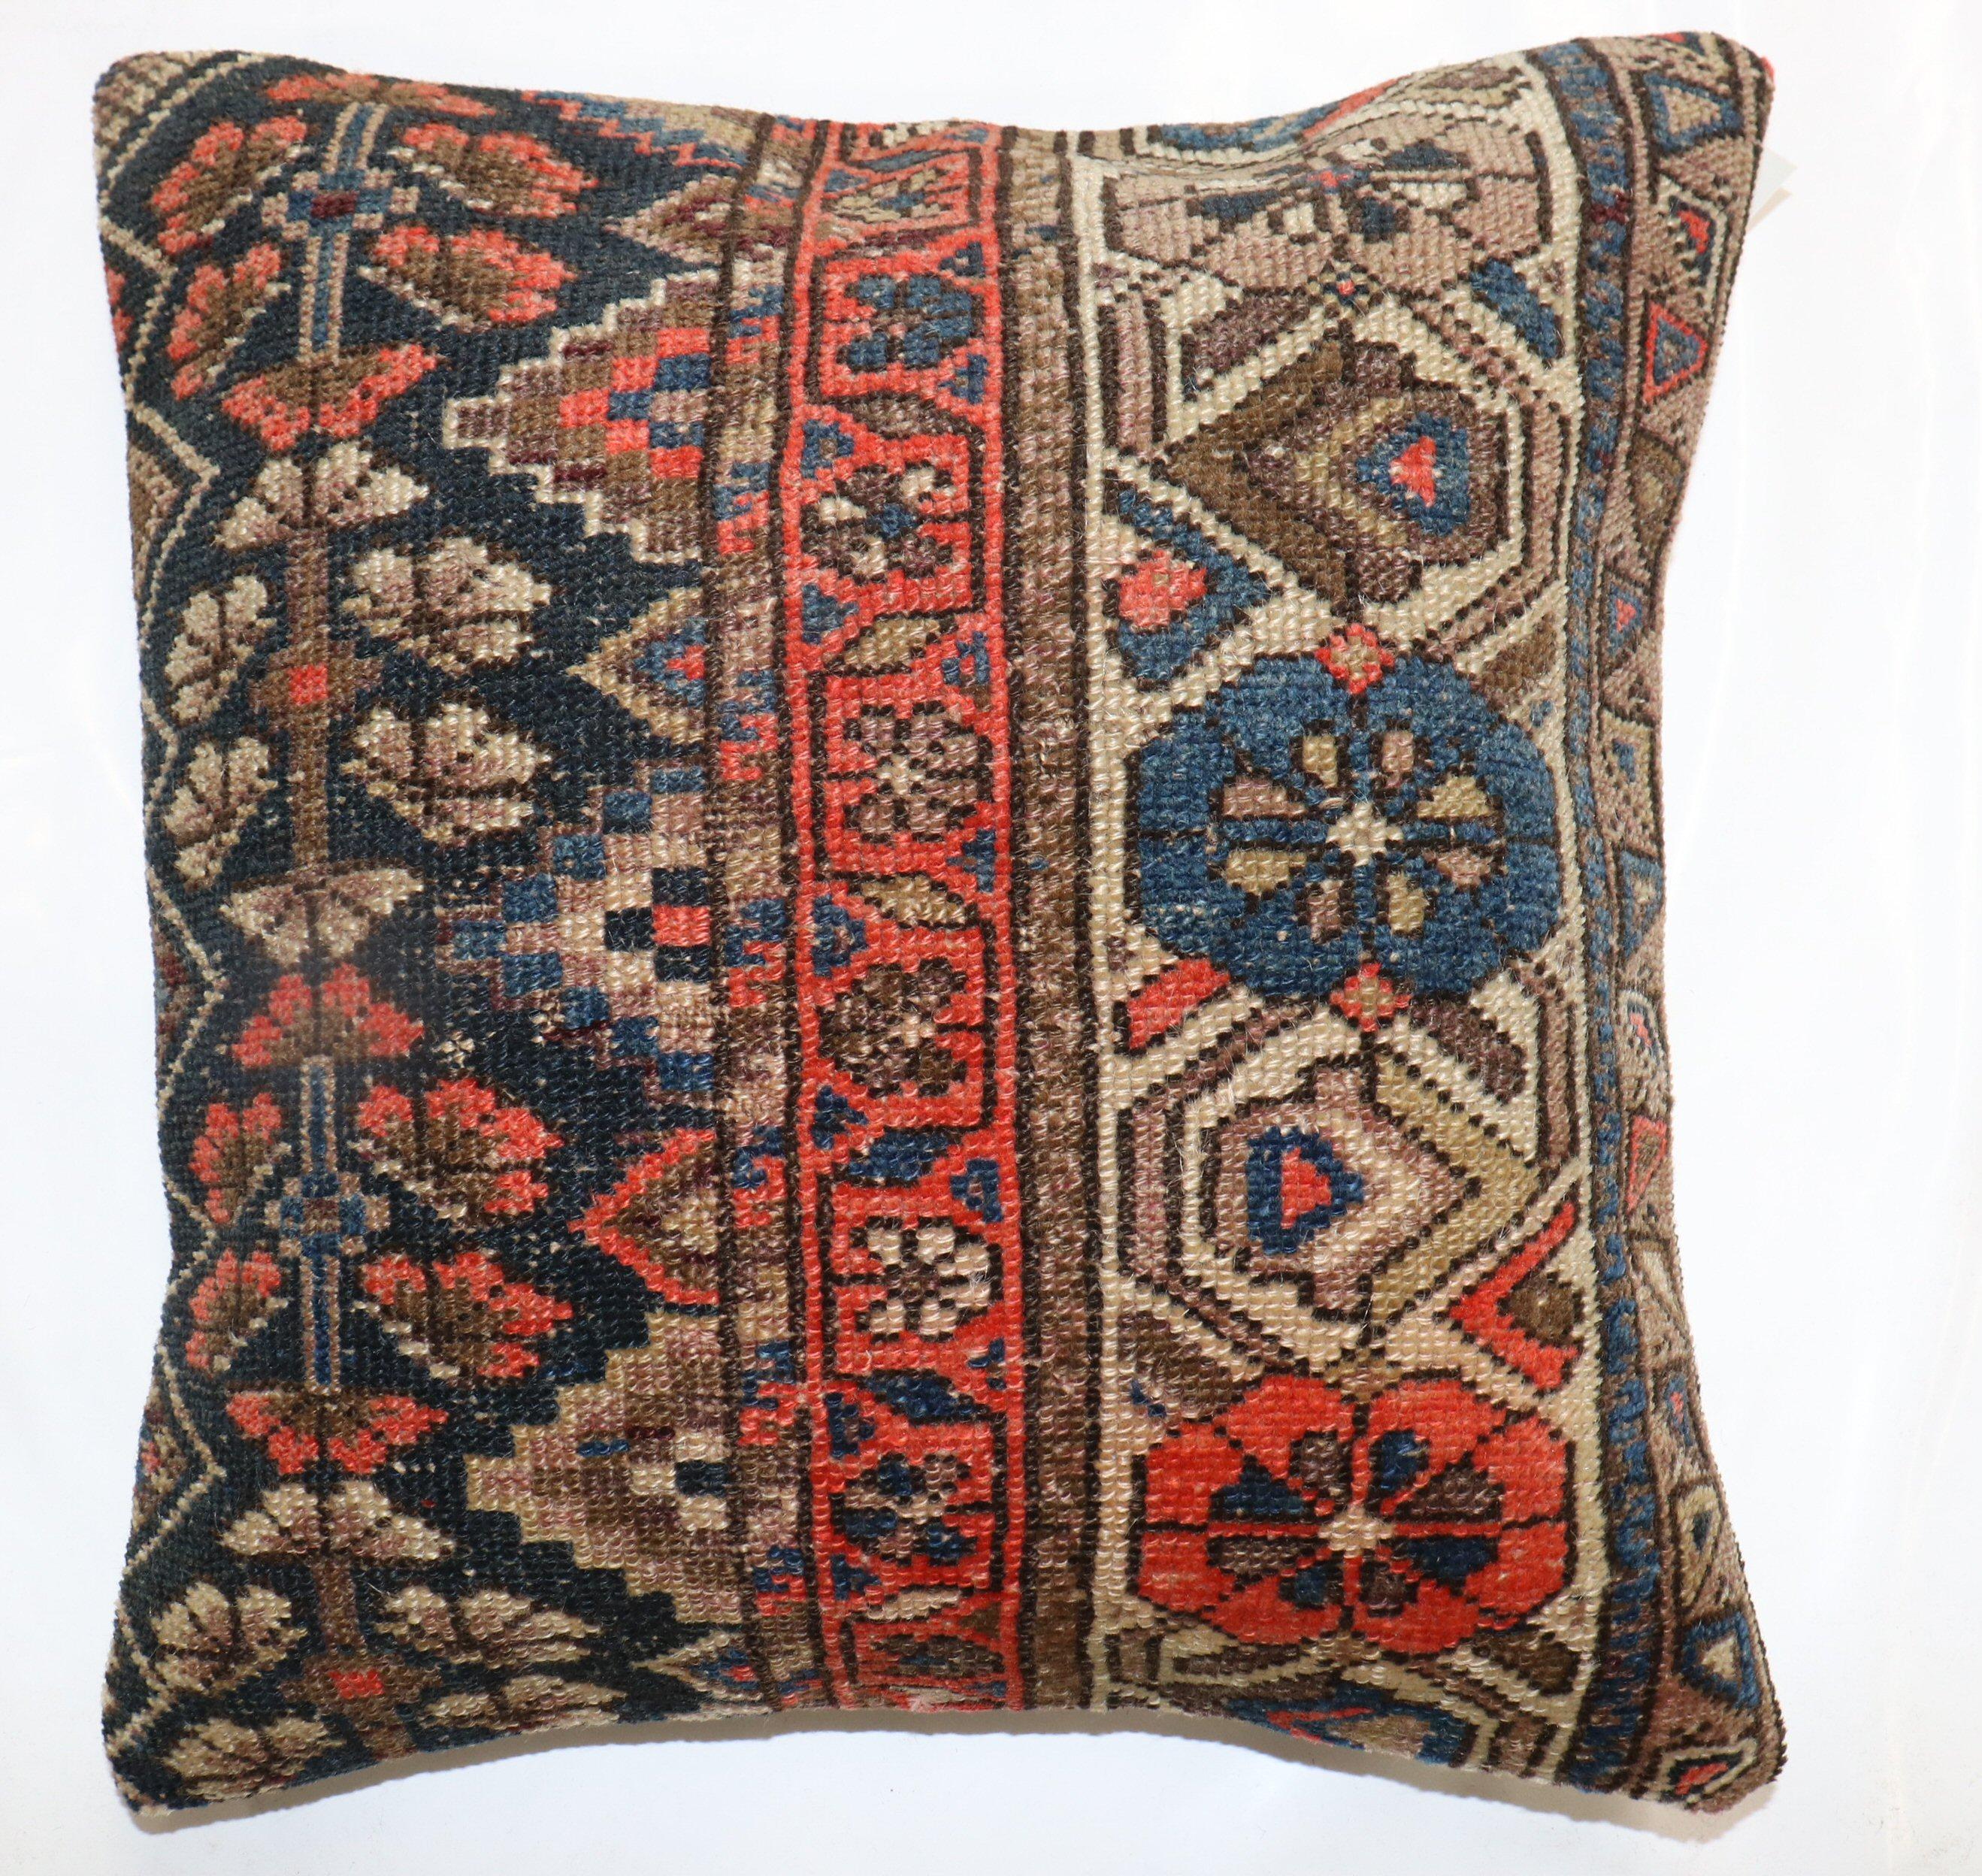 Pillow made from a 20th-century Navy Persian Malayer rug

Measures: 19